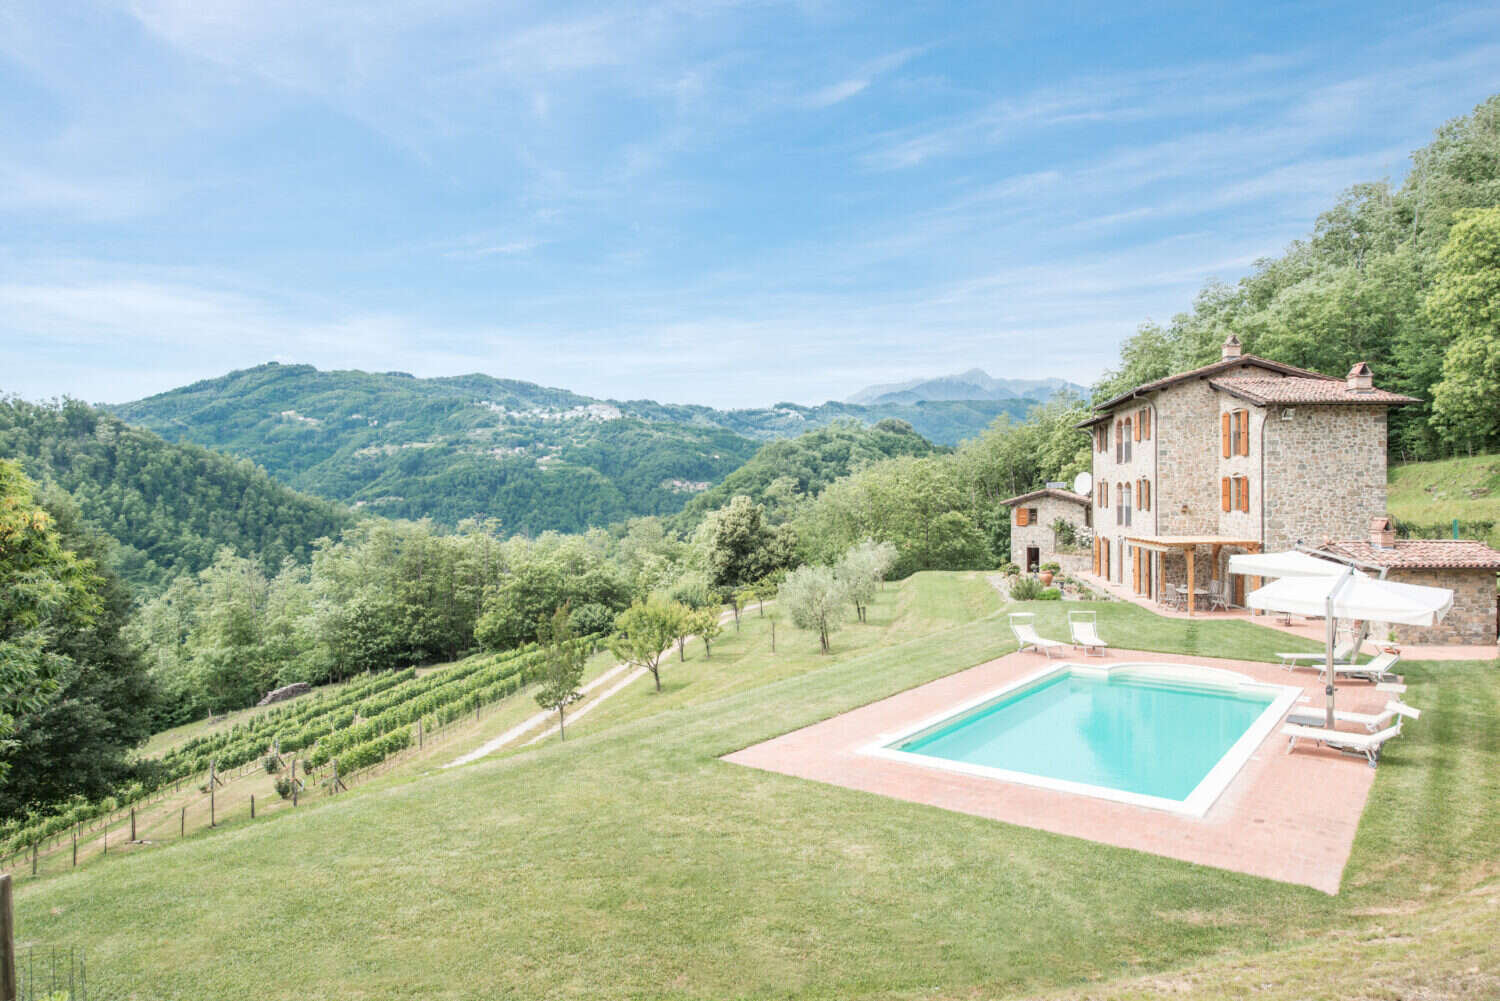 This Beautiful Tuscan Farmhouse Is a Wine Lover’s Dream